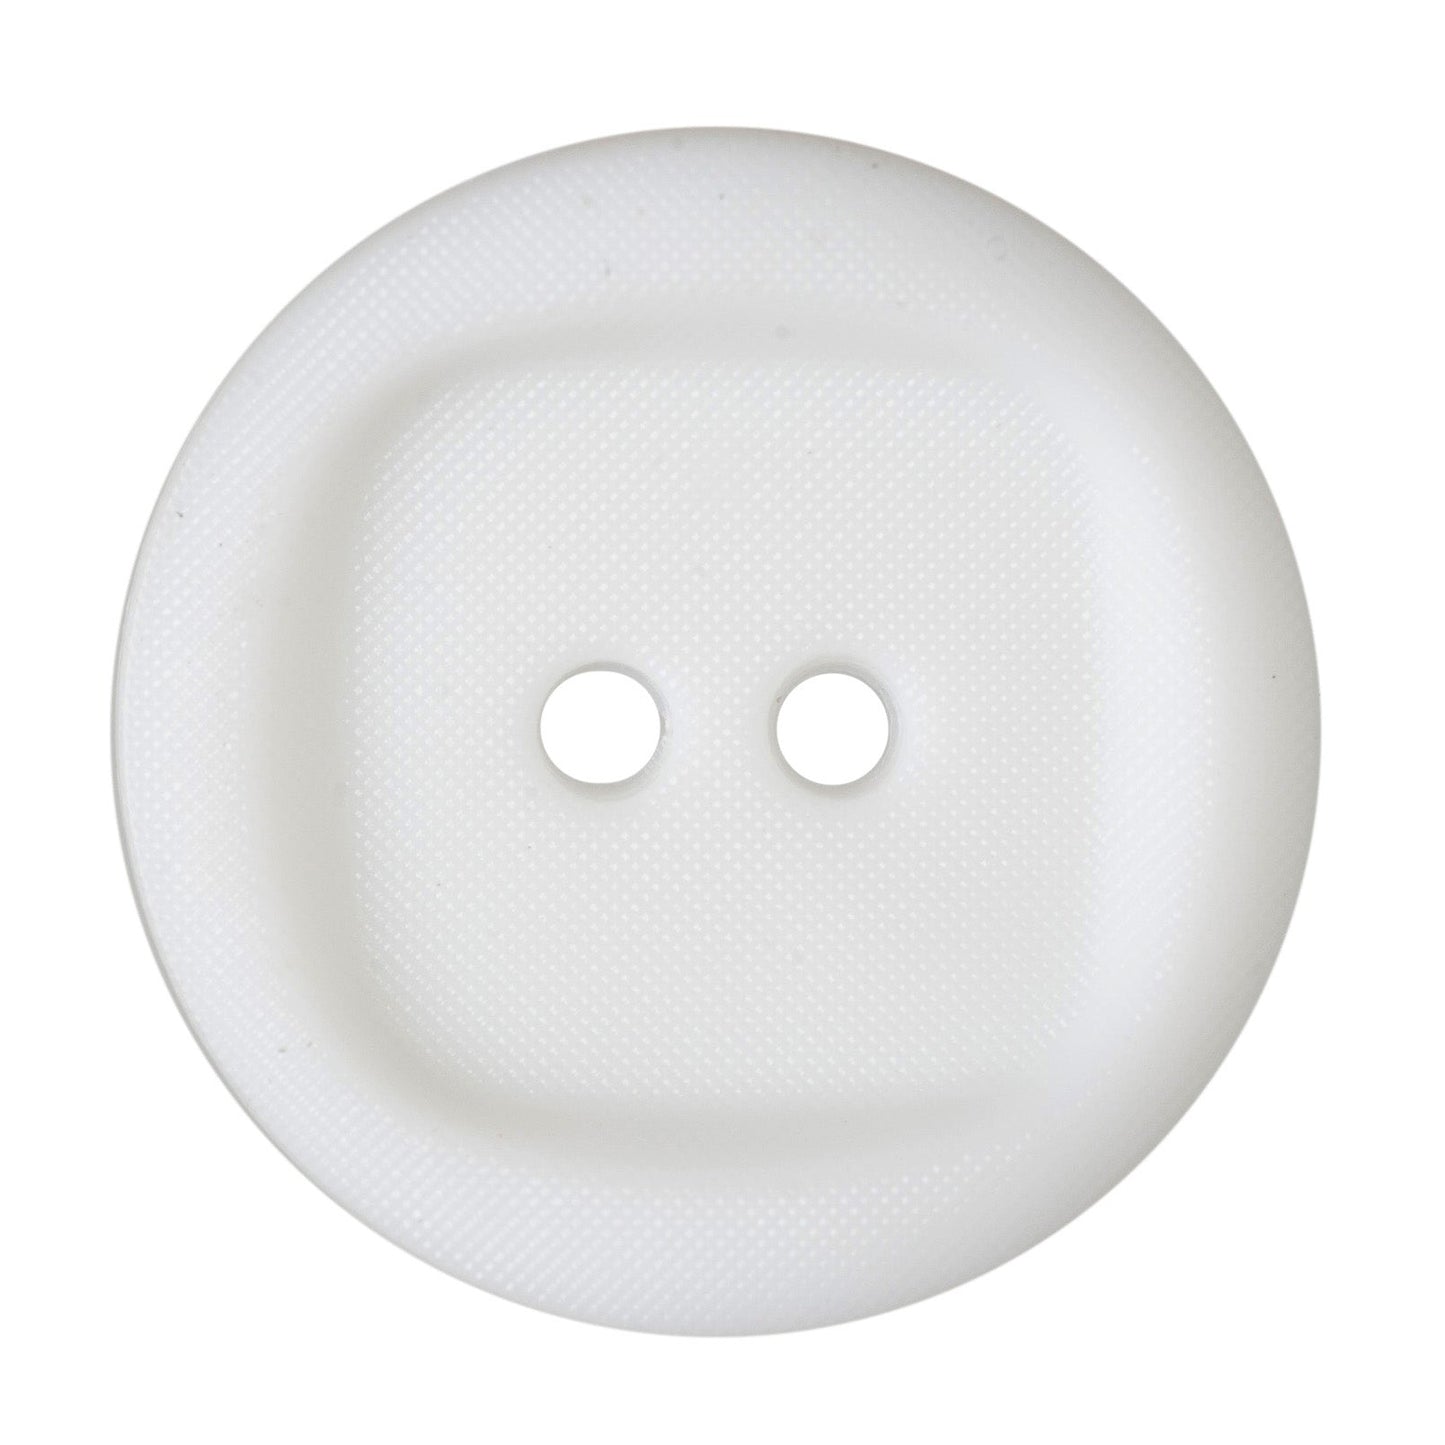 2 Hole Wavy with Square Insert Button - 24mm - White [LD5.3]